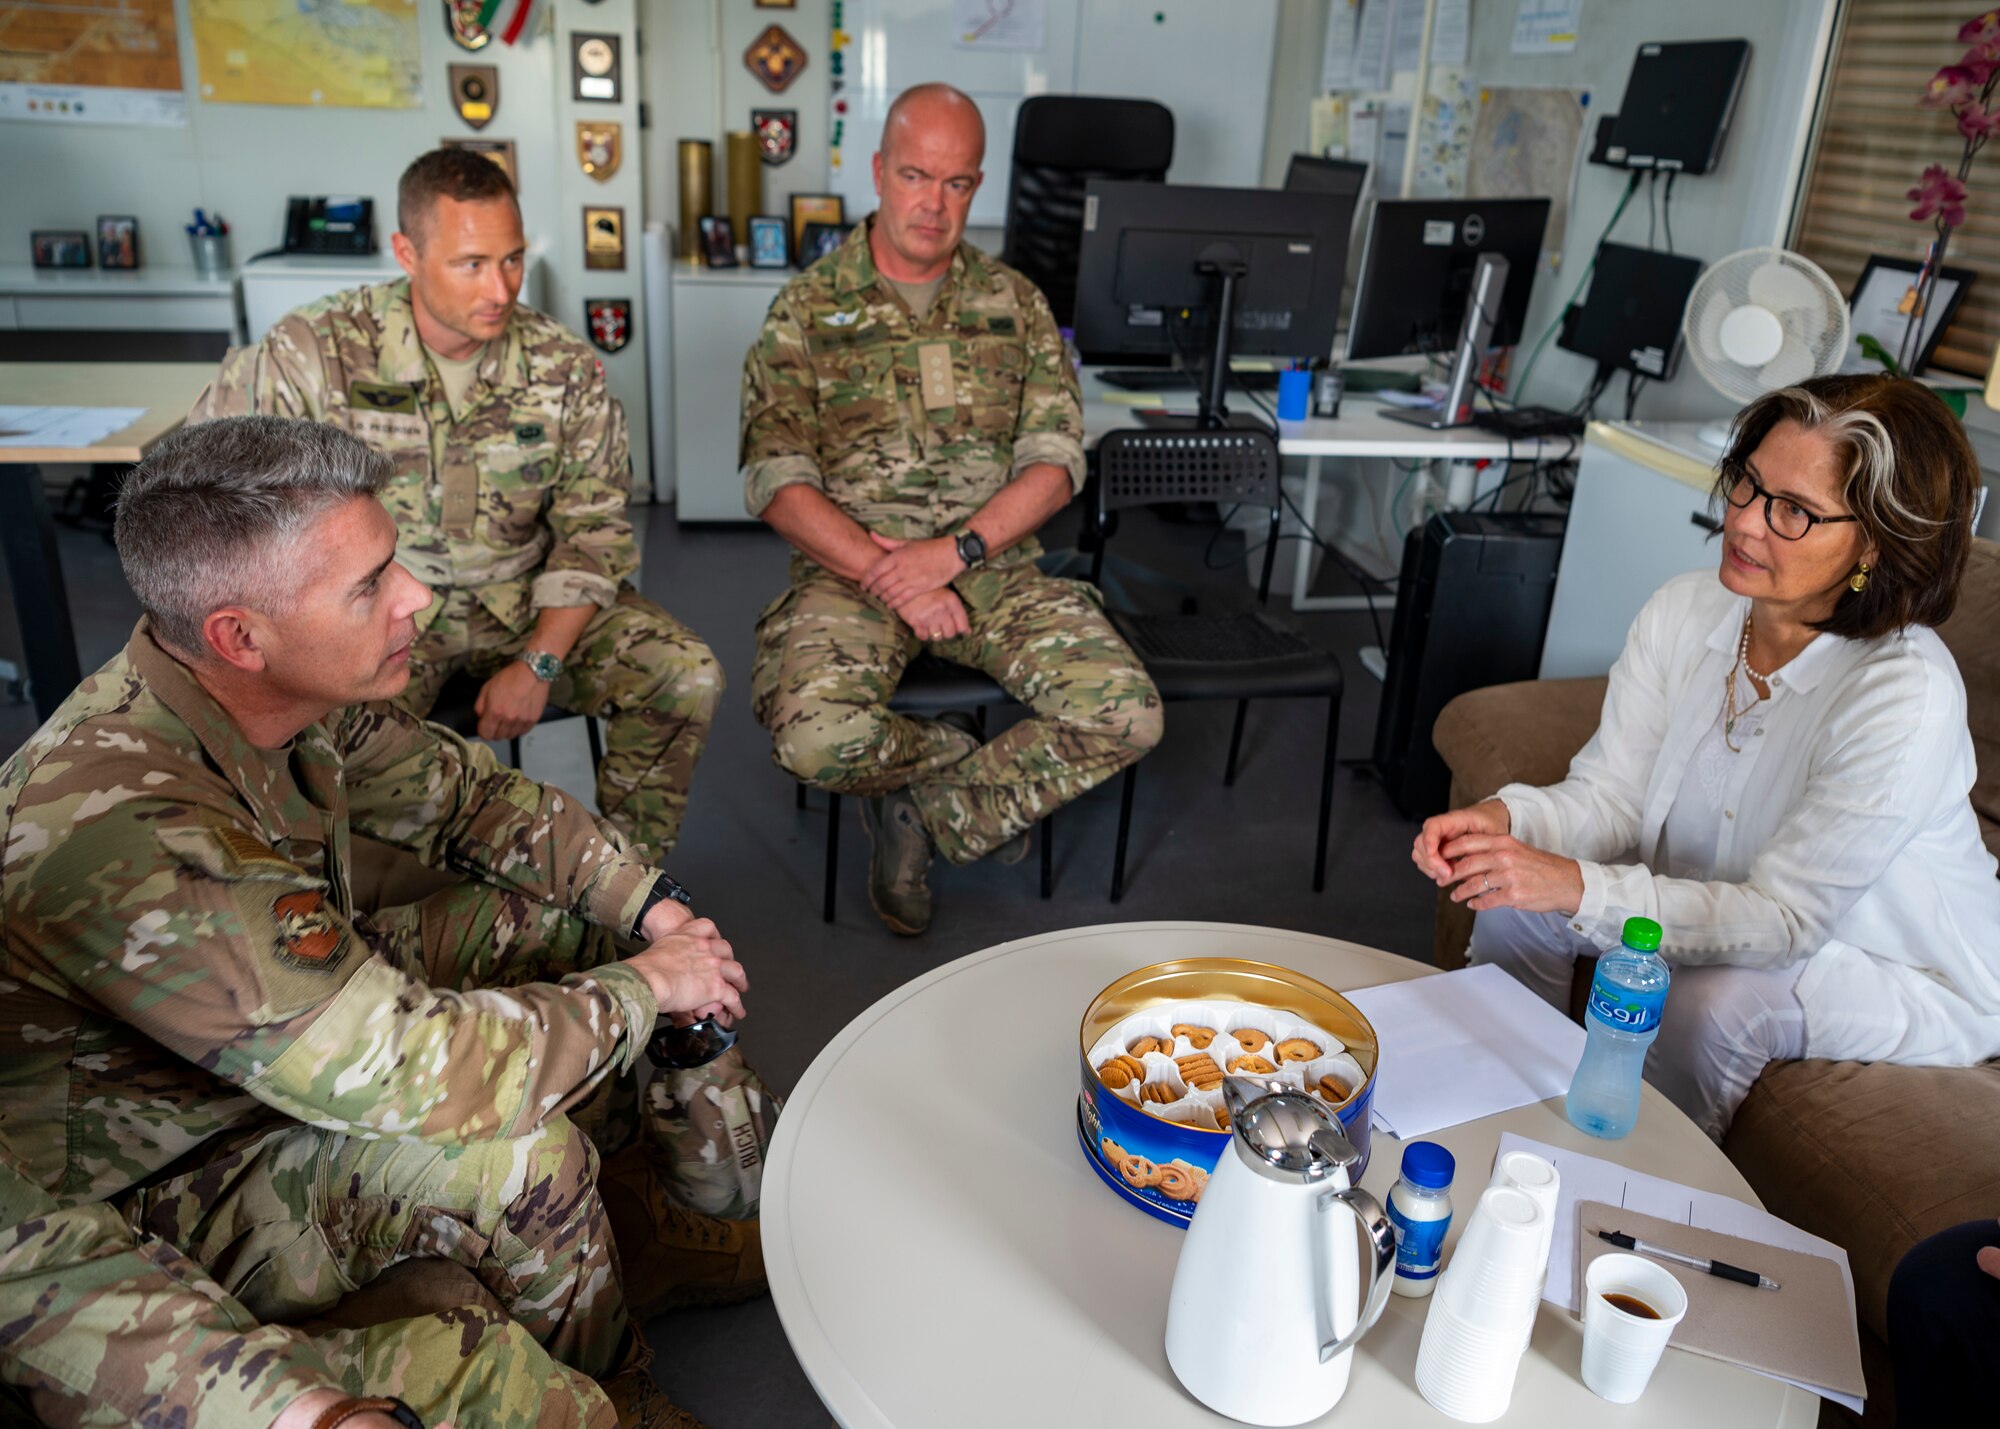 U.S. Air Force Col. George Buch, 386th Air Expeditionary Wing commander, along with Danish coalition partners in the region have a discussion with Liselotte Plesner, Ambassador of Denmark, at Ali Al Salem Air Base, Kuwait, May 31, 2023. The visit supported the valued partnership between Denmark and U.S. Forces to support stability in the region. (U.S. Air Force photo by Tech. Sgt. Isaac Garden)